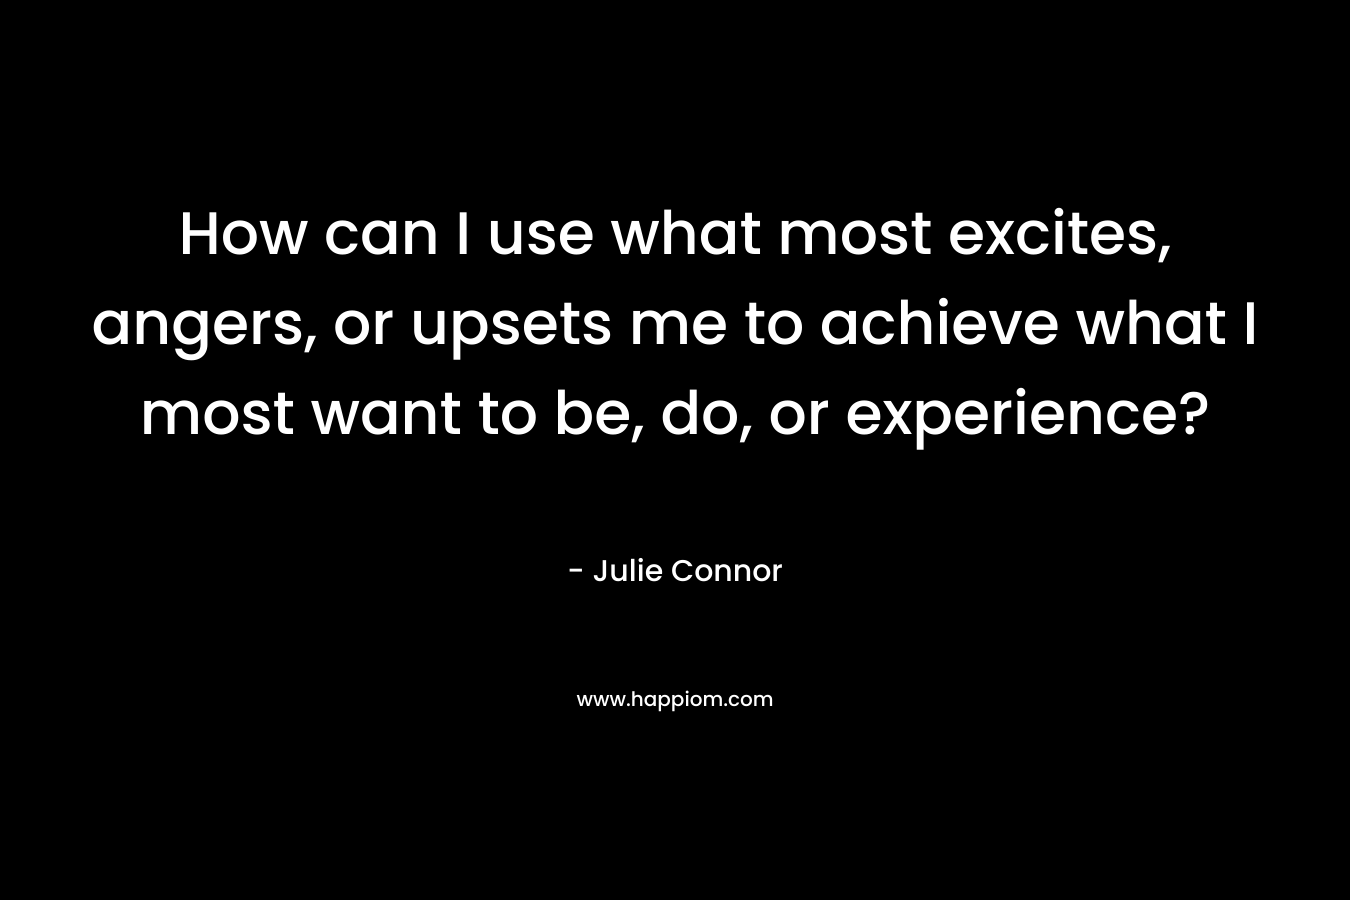 How can I use what most excites, angers, or upsets me to achieve what I most want to be, do, or experience?